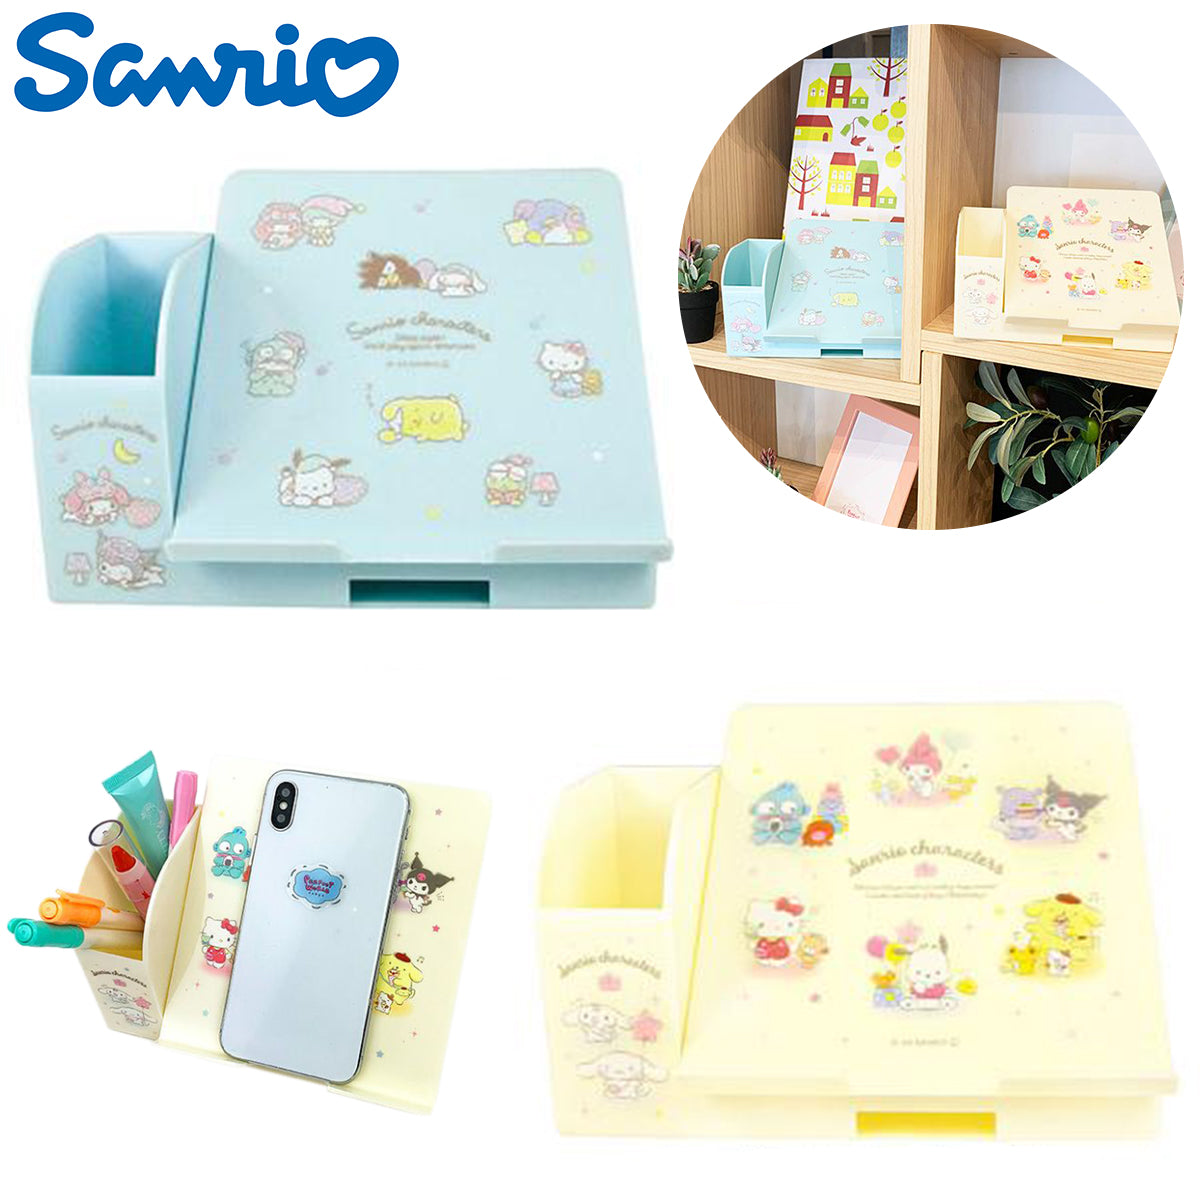 Multi Stand - Sanrio Character (Japan Edition)